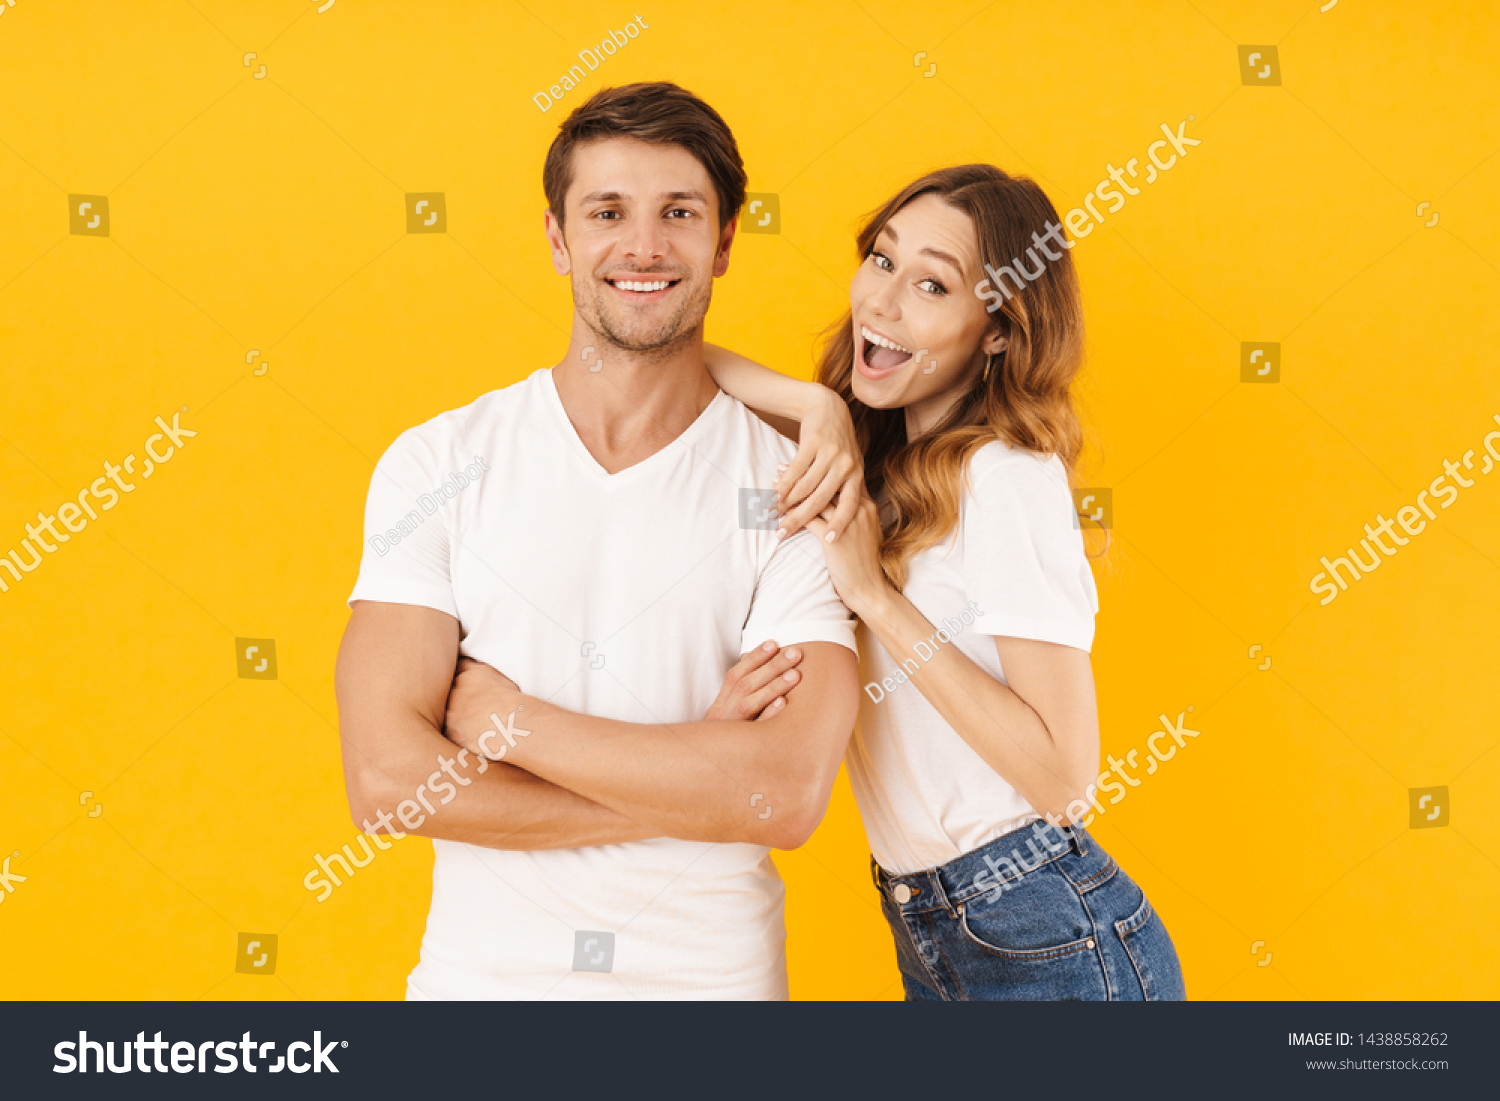 Portrait of joyous couple man and woman in basic t-shirts smiling and hugging together isolated over yellow background #1438858262